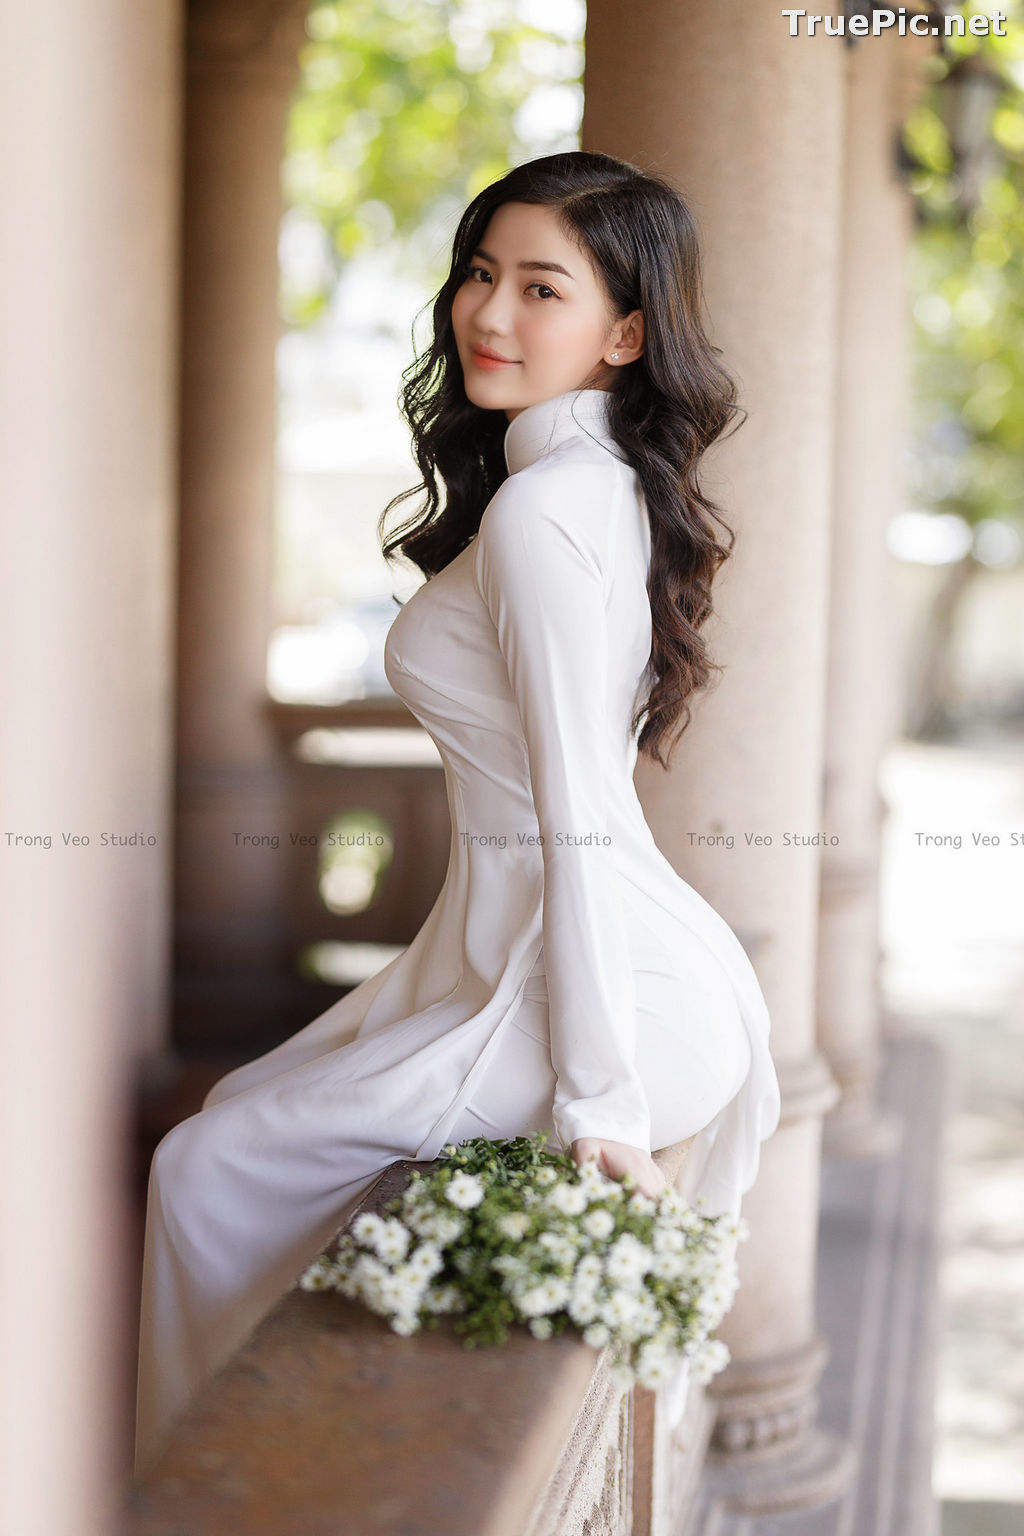 Image The Beauty of Vietnamese Girls with Traditional Dress (Ao Dai) #1 - TruePic.net - Picture-39